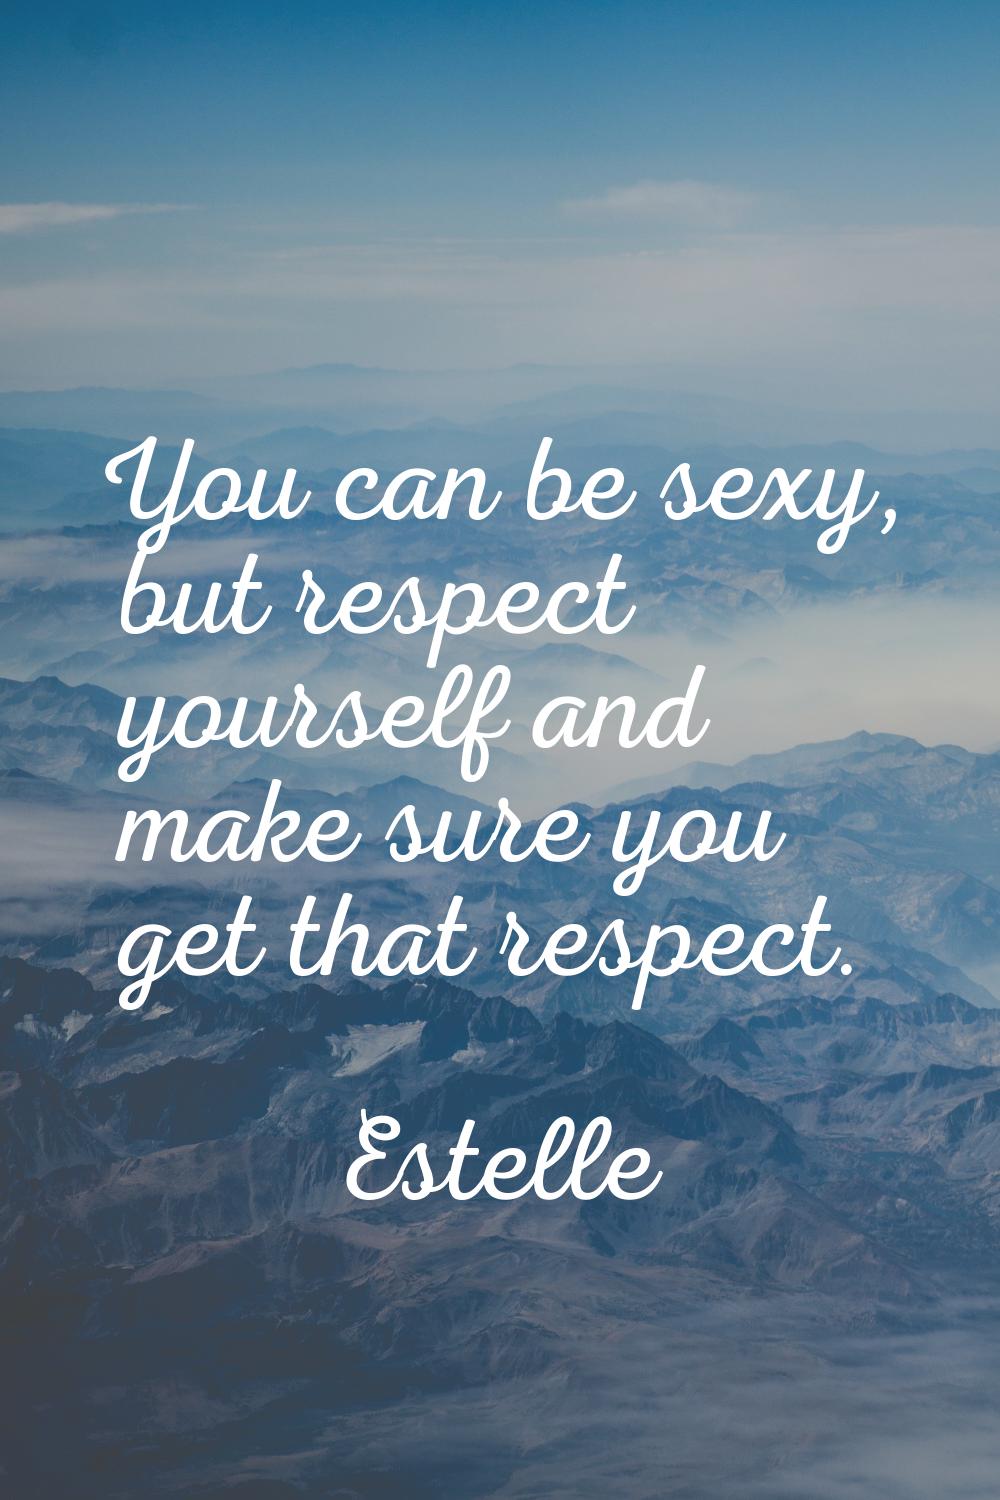 You can be sexy, but respect yourself and make sure you get that respect.